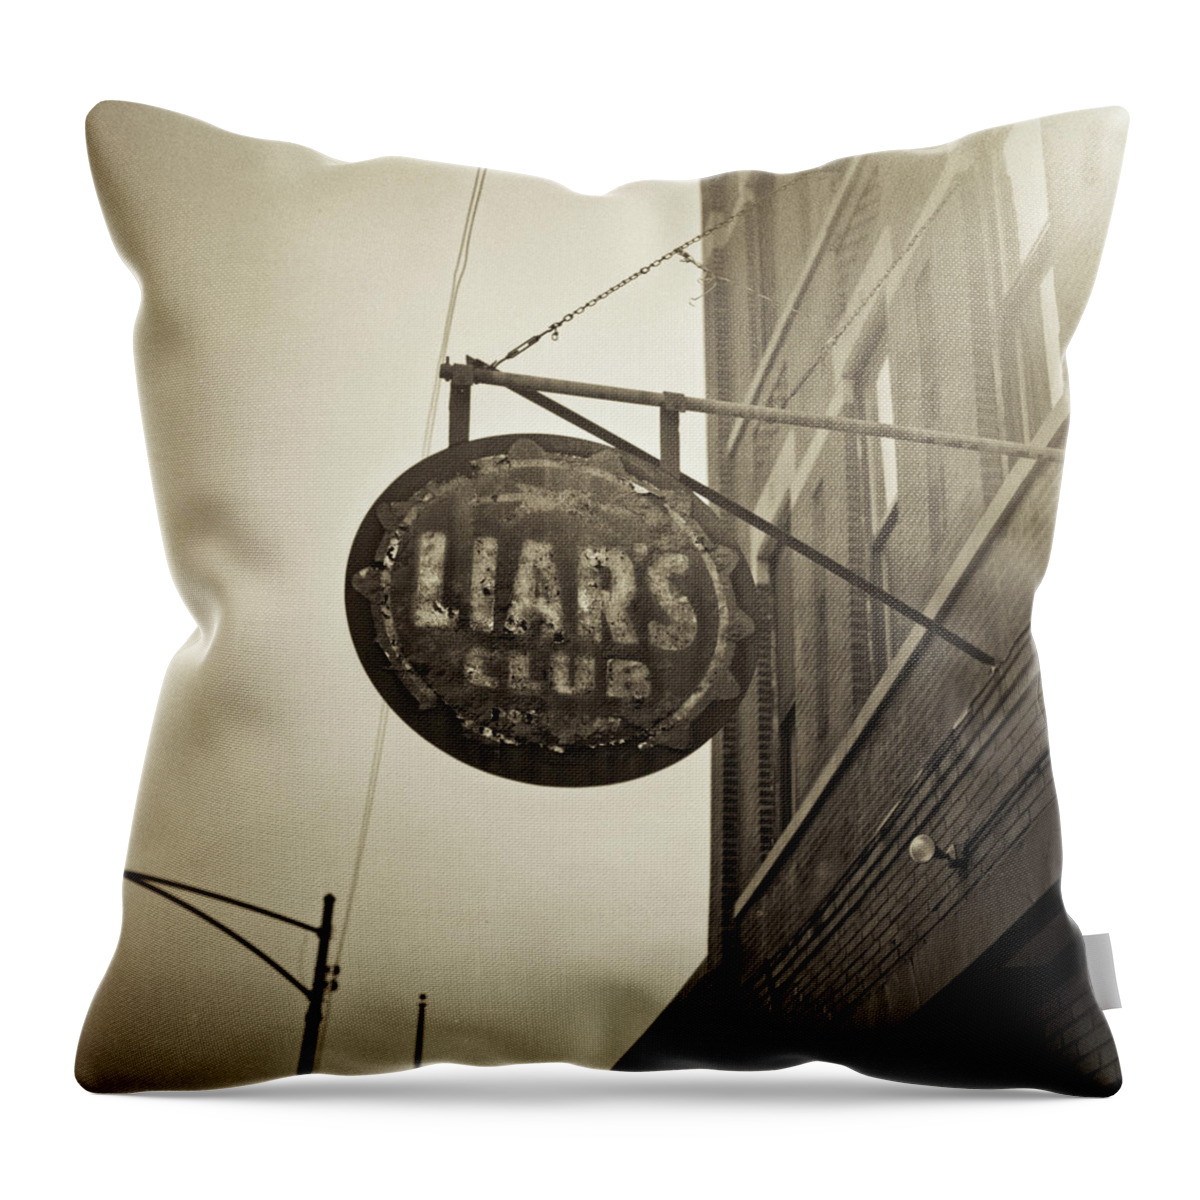 Nightclub Throw Pillow featuring the photograph Liars Club Chicago by T Scott Carlisle